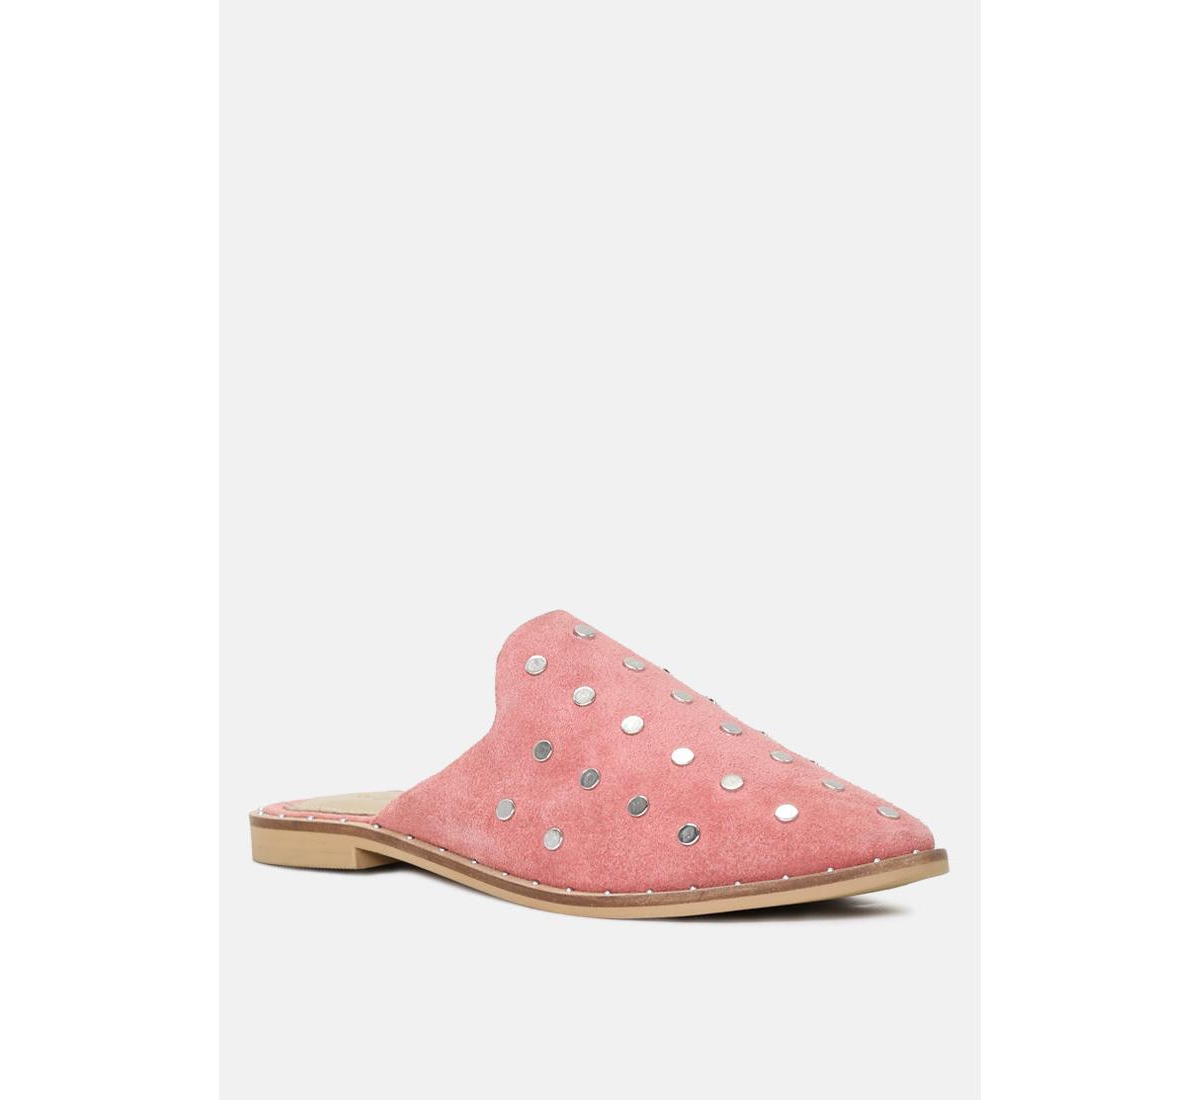 RAG & CO JODIE WOMENS DUSTY PINK STUDDED LEATHER MULES